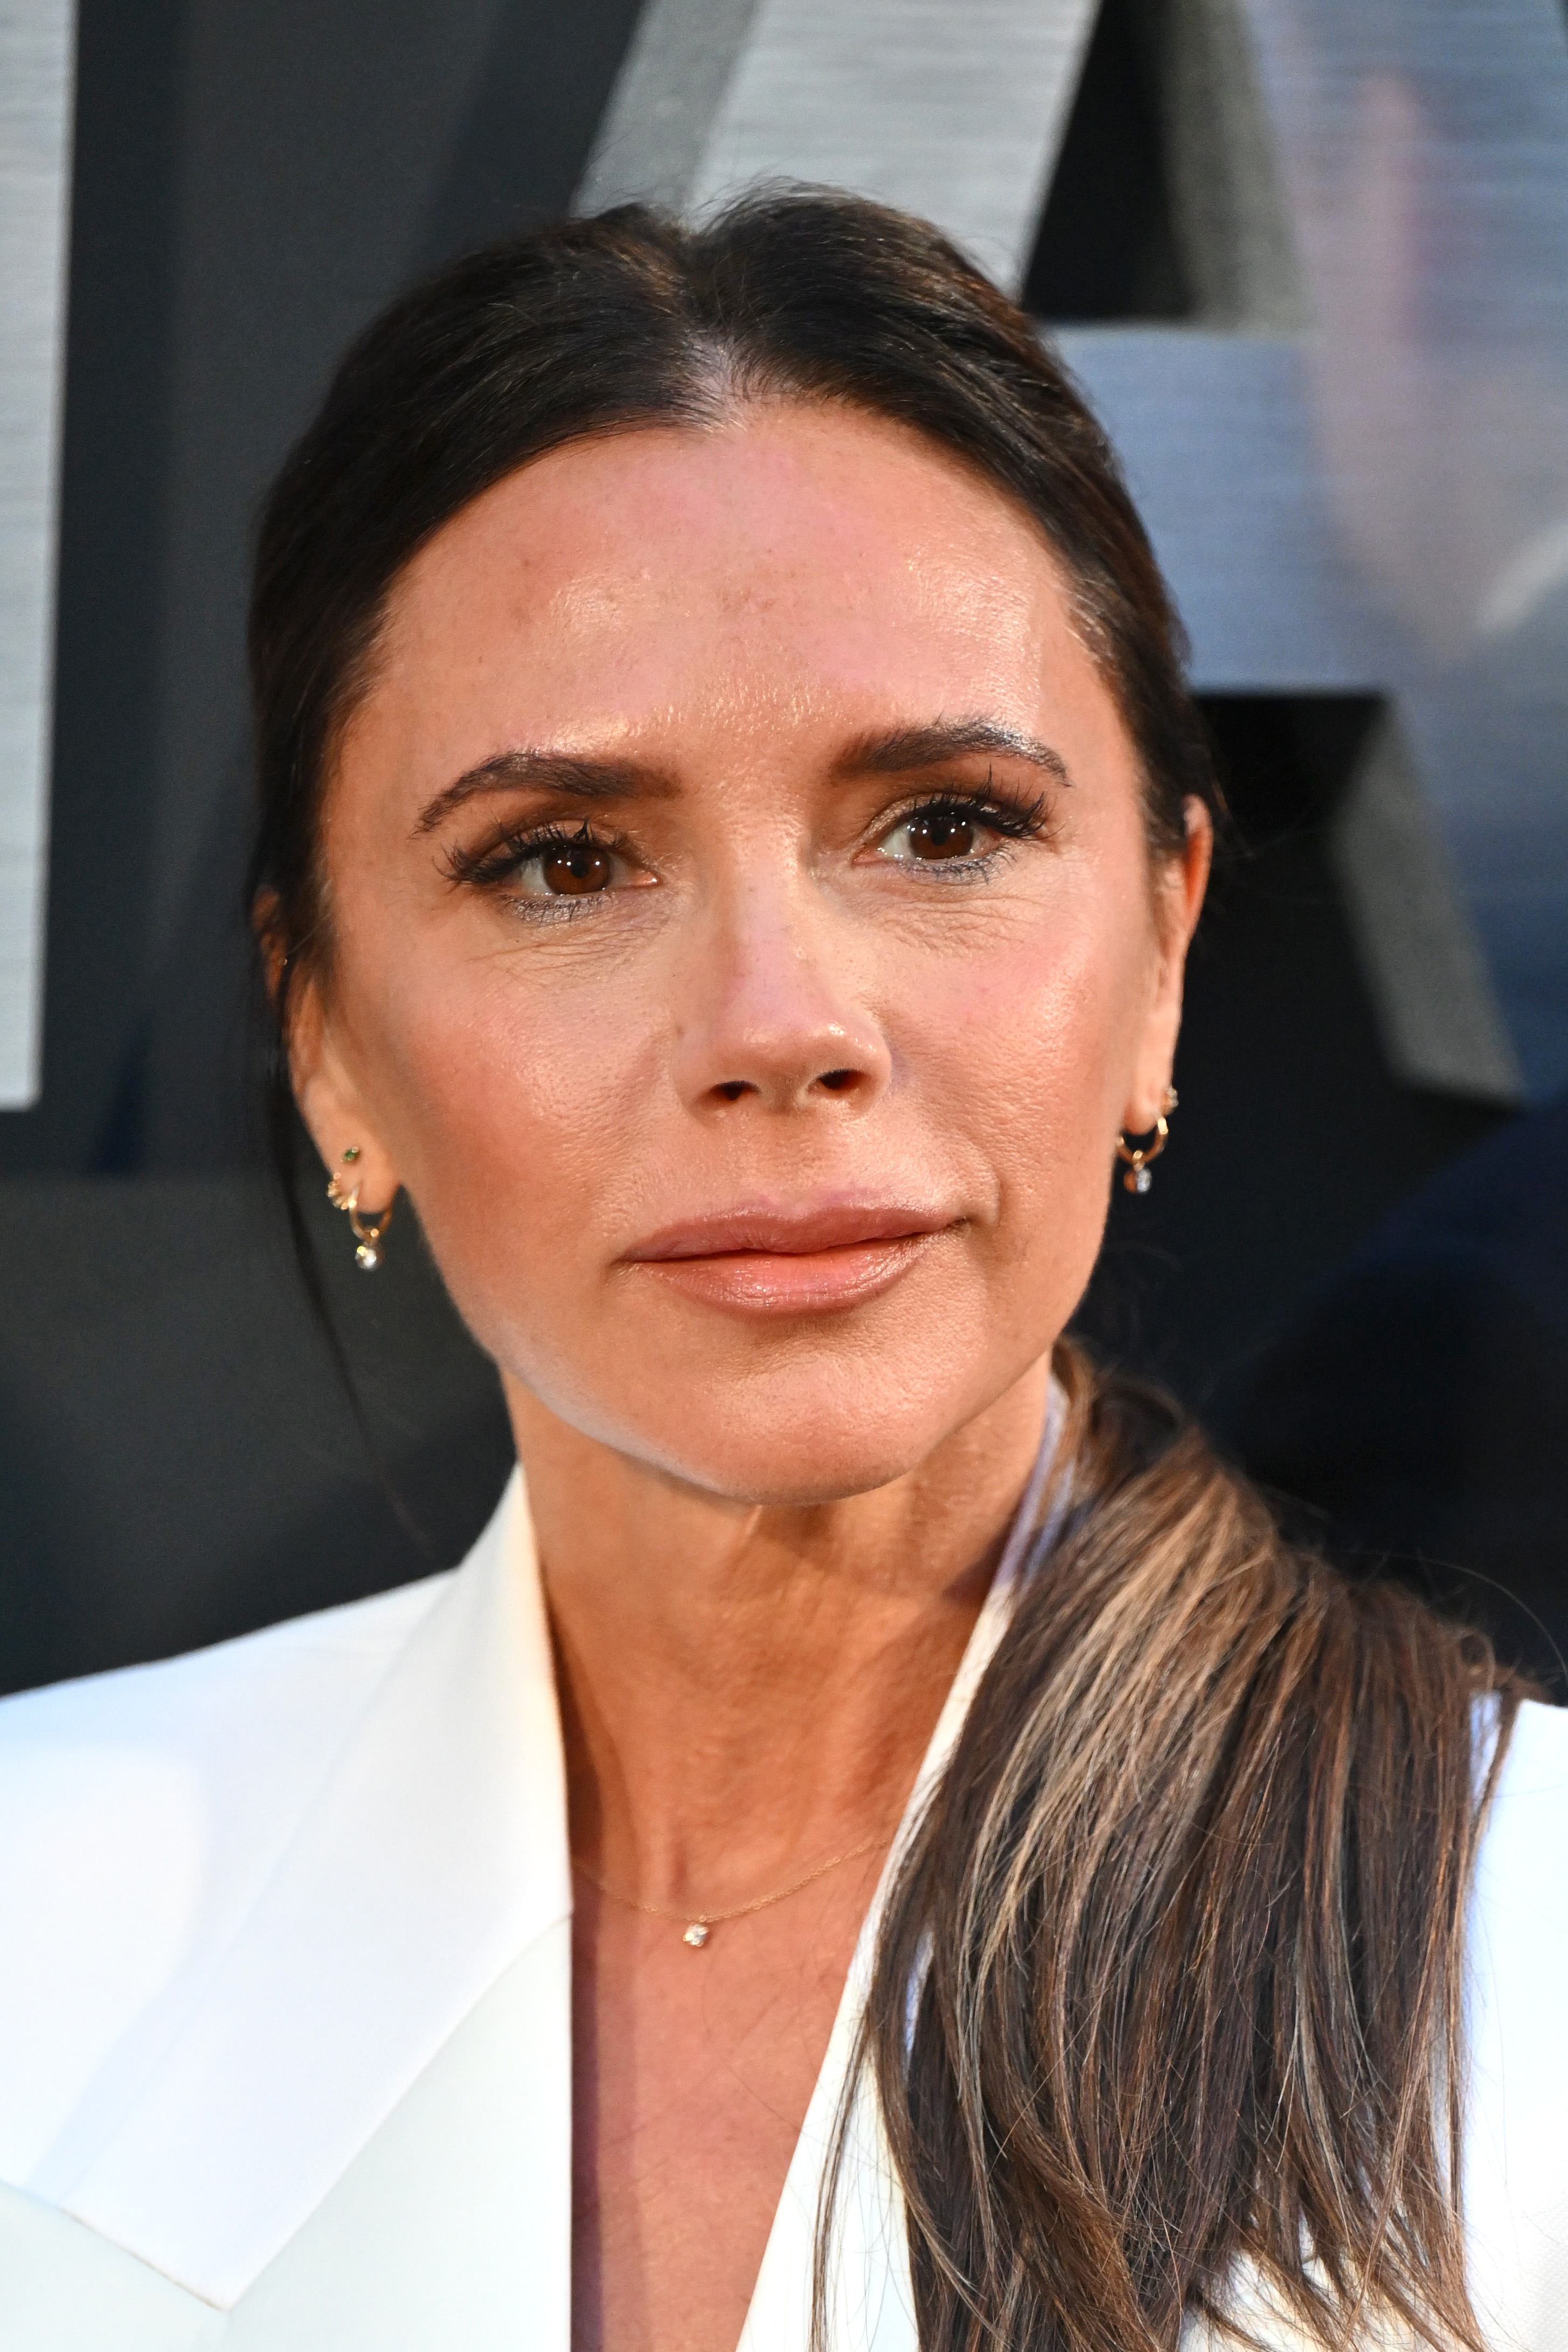 Victoria Beckham attends the "Beckham" premiere at The Curzon Mayfair on October 3, 2023 in London, England. | Source: Getty Images